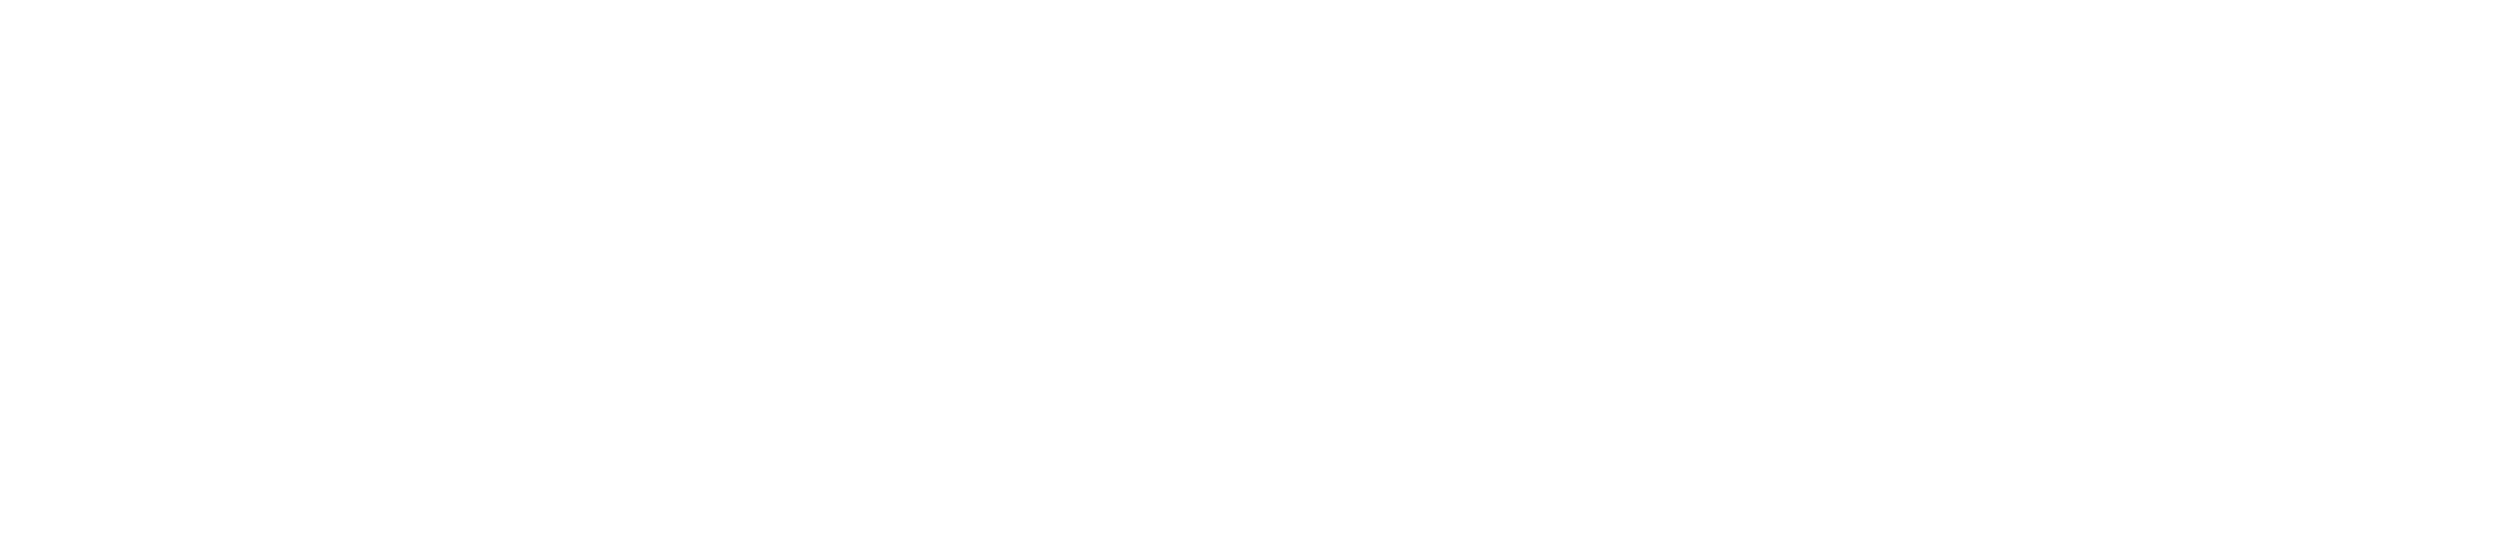 Couples Counseling South Austin